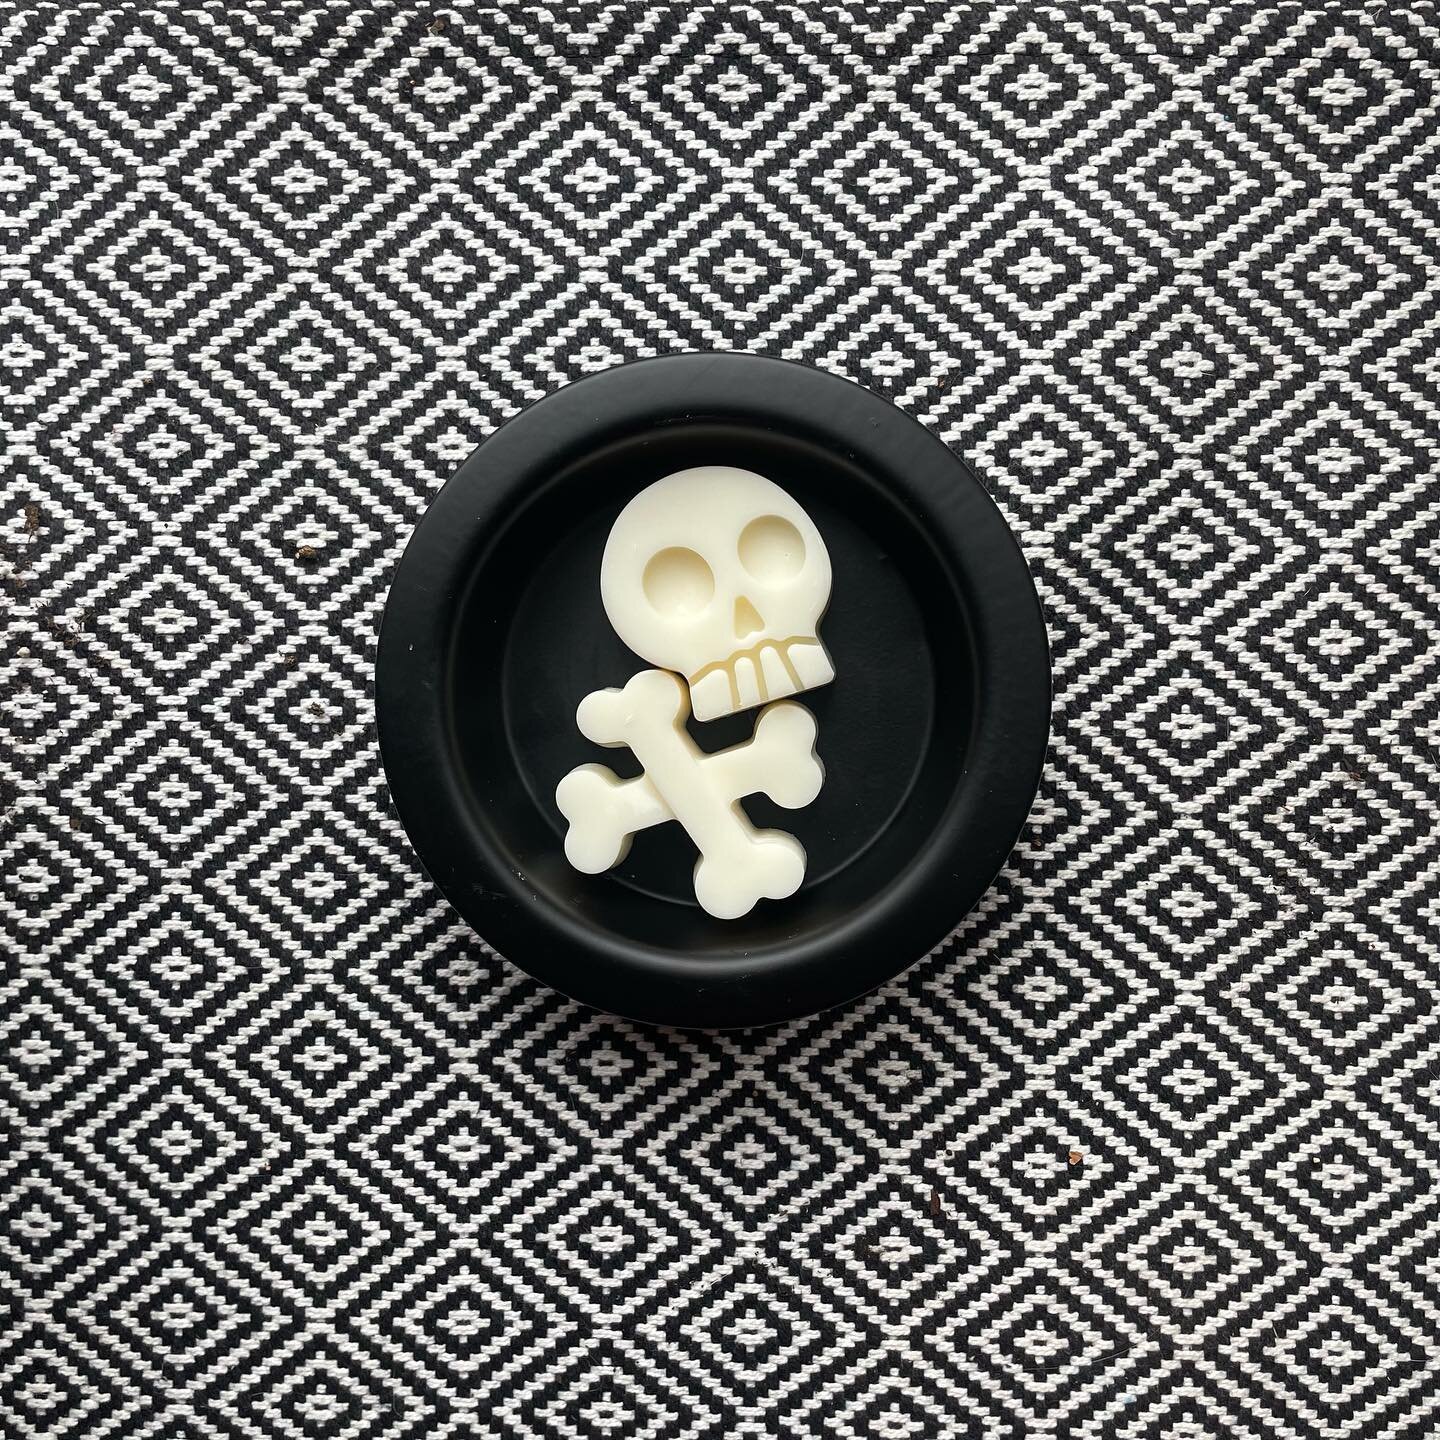 Wax melts are now available in any scent for just $5 at www.fearthebeardcandles.com